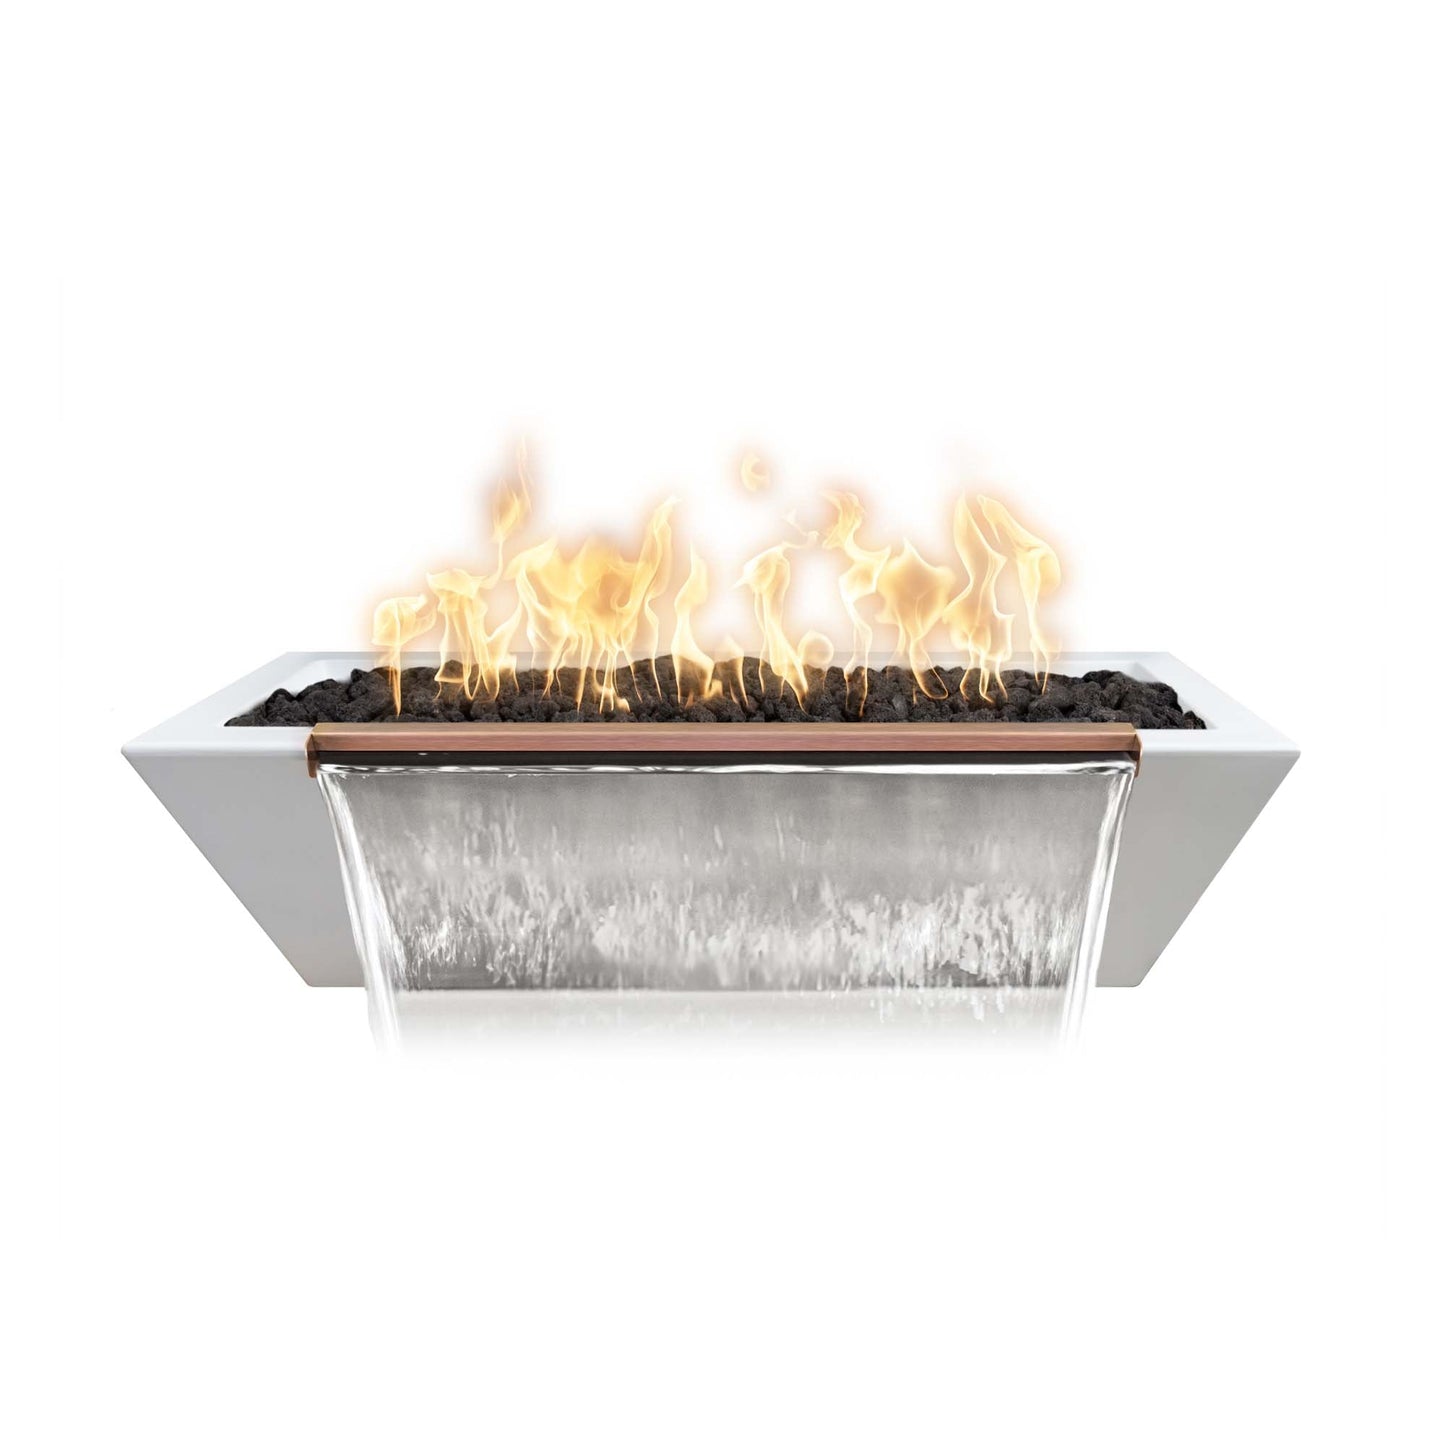 The Outdoor Plus Linear Maya 60" Metallic Slate GFRC Concrete Natural Gas Fire & Water Bowl with Match Lit with Flame Sense Ignition